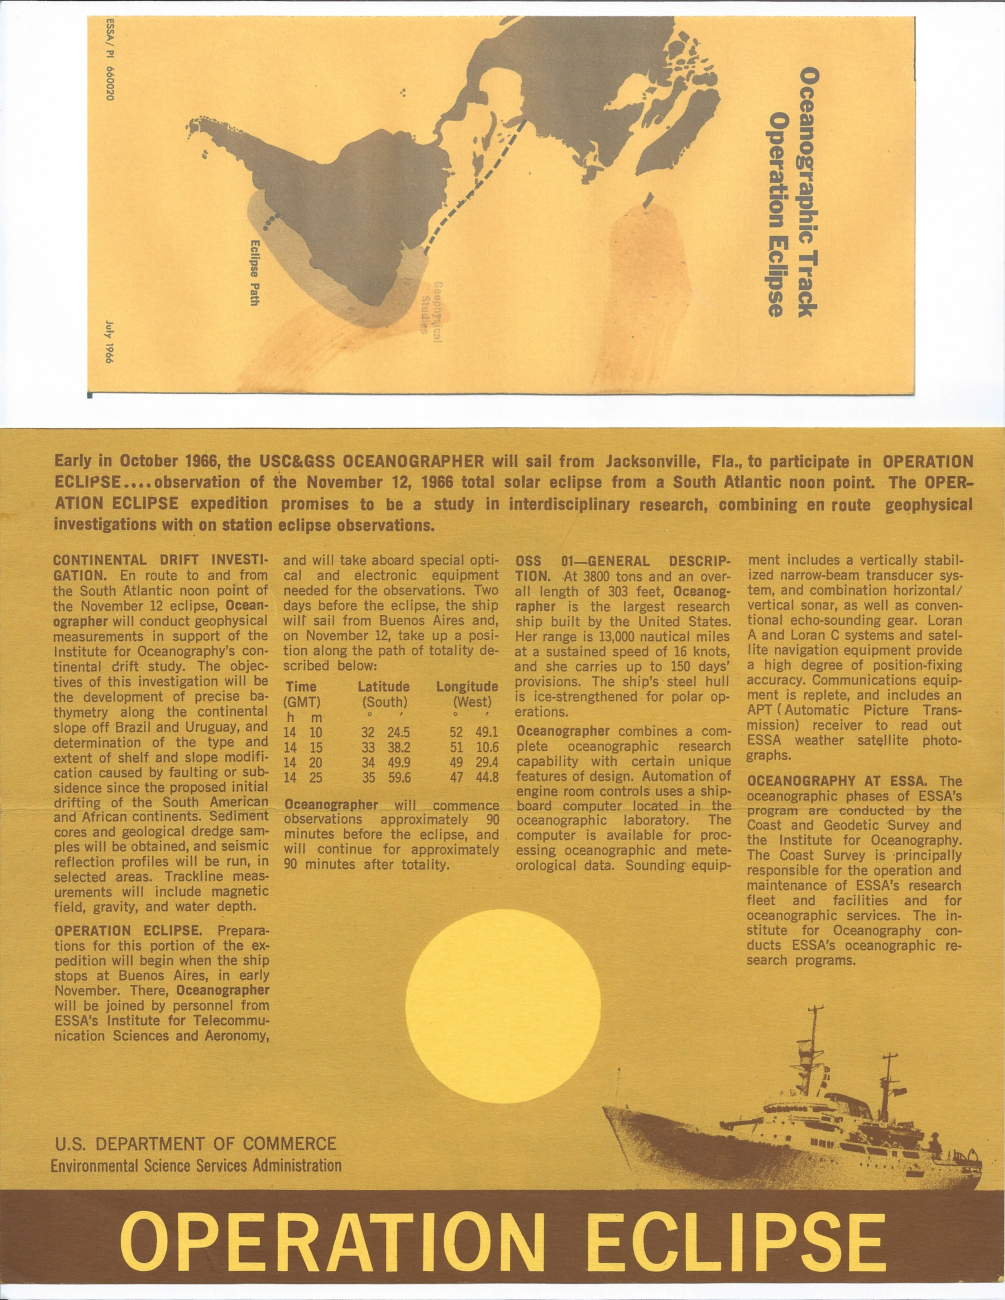 Text of Eclipse Expedition brochure, the first major expedition of the USC&GS;Ship OCEANOGRAPHER